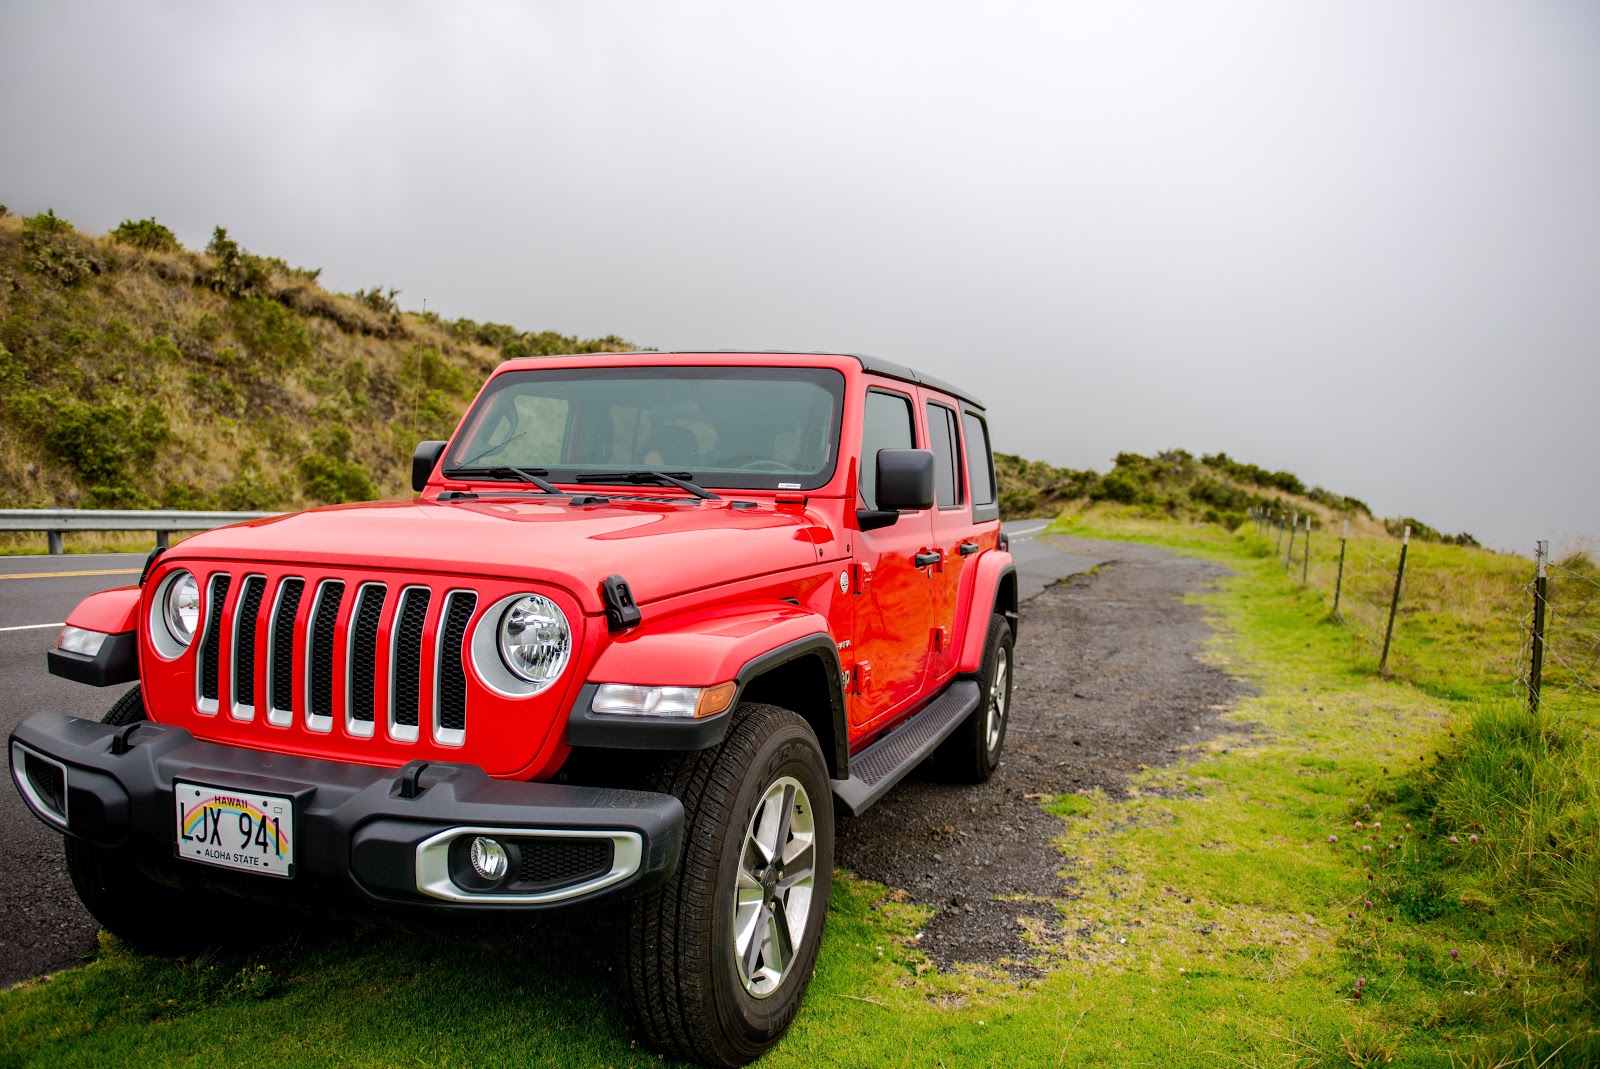 Why You Should Buy A Jeep Wrangler | Puente Hills Hyundai